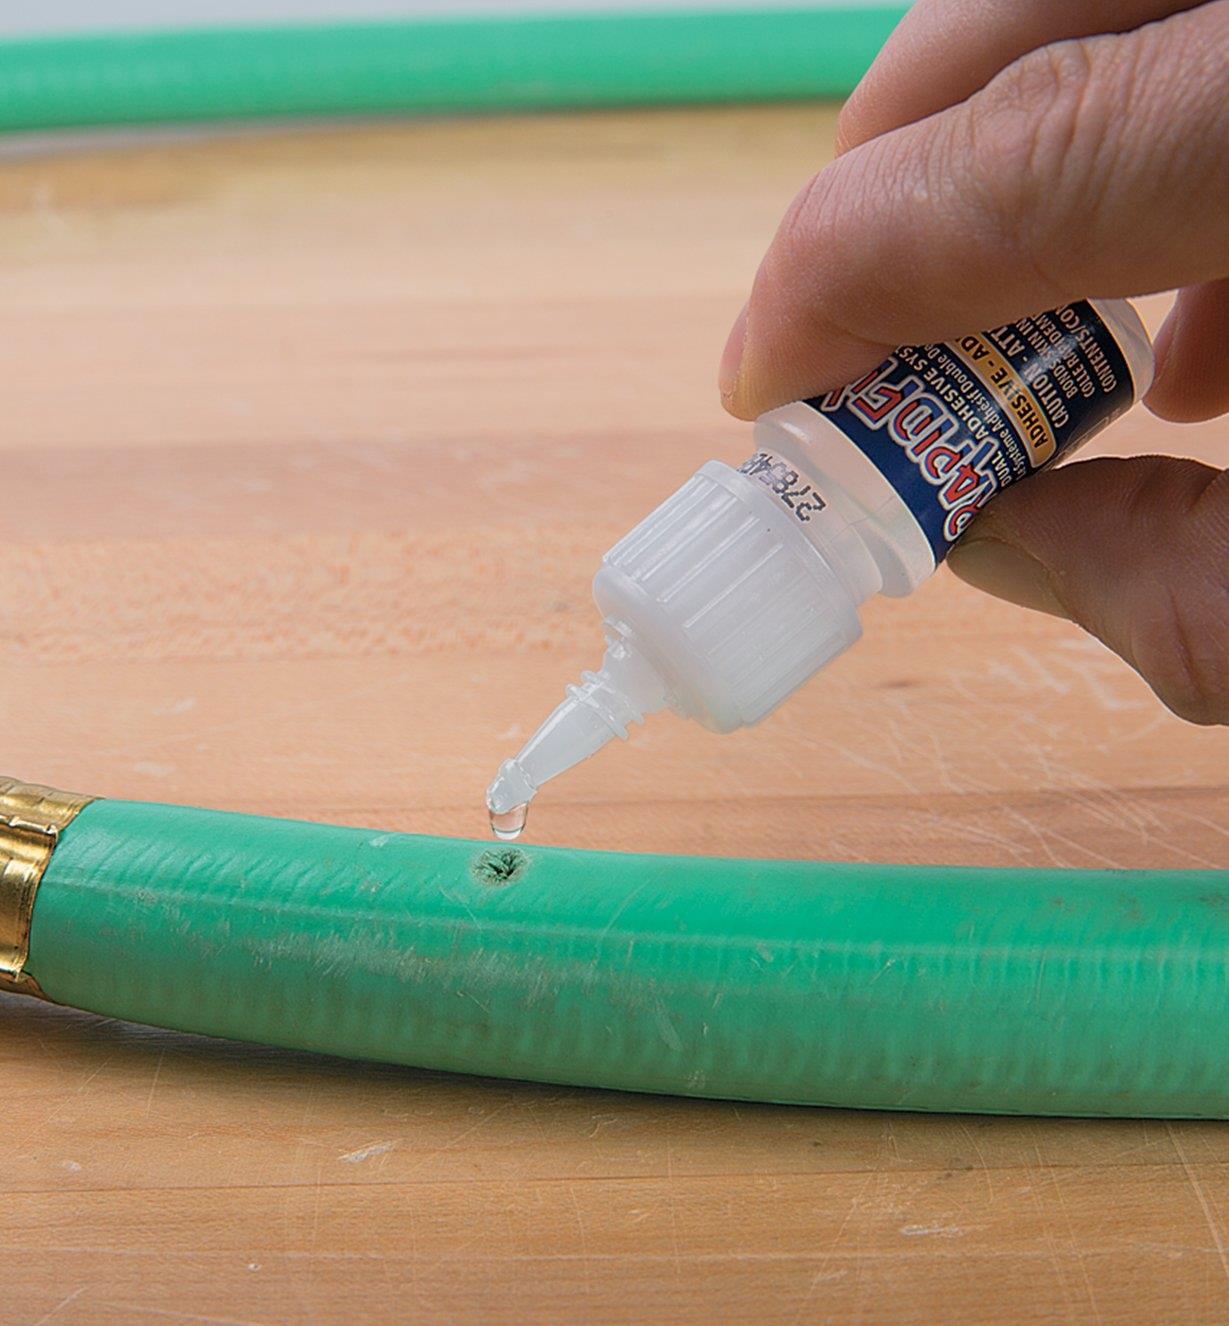 Applying glue to a hole in a hose